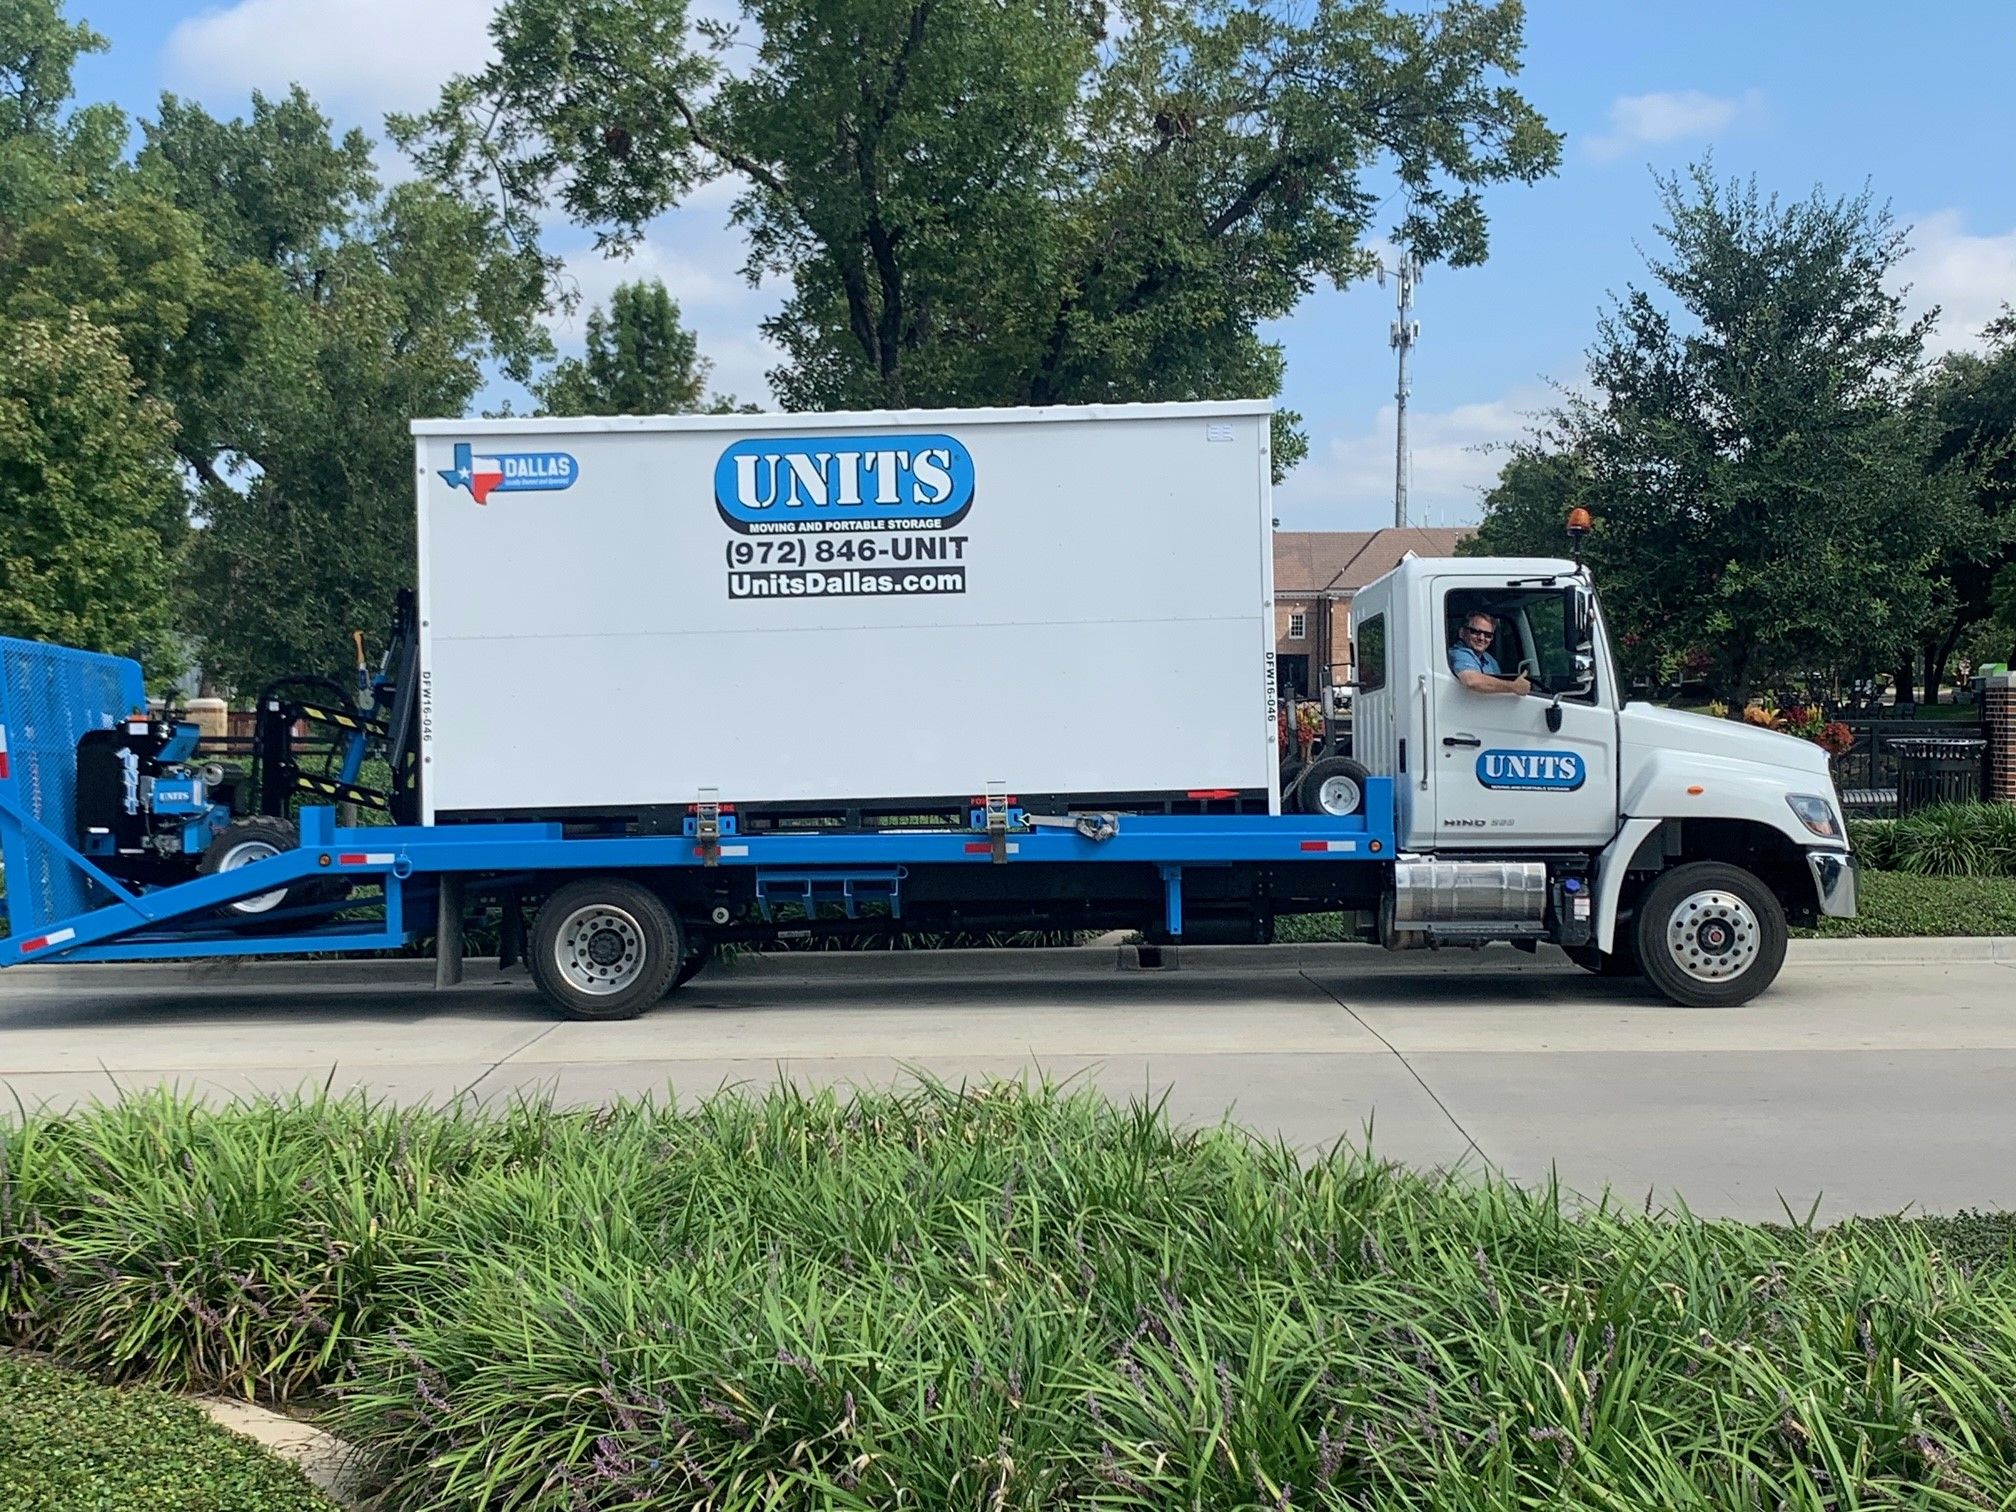 UNITS truck delivering container